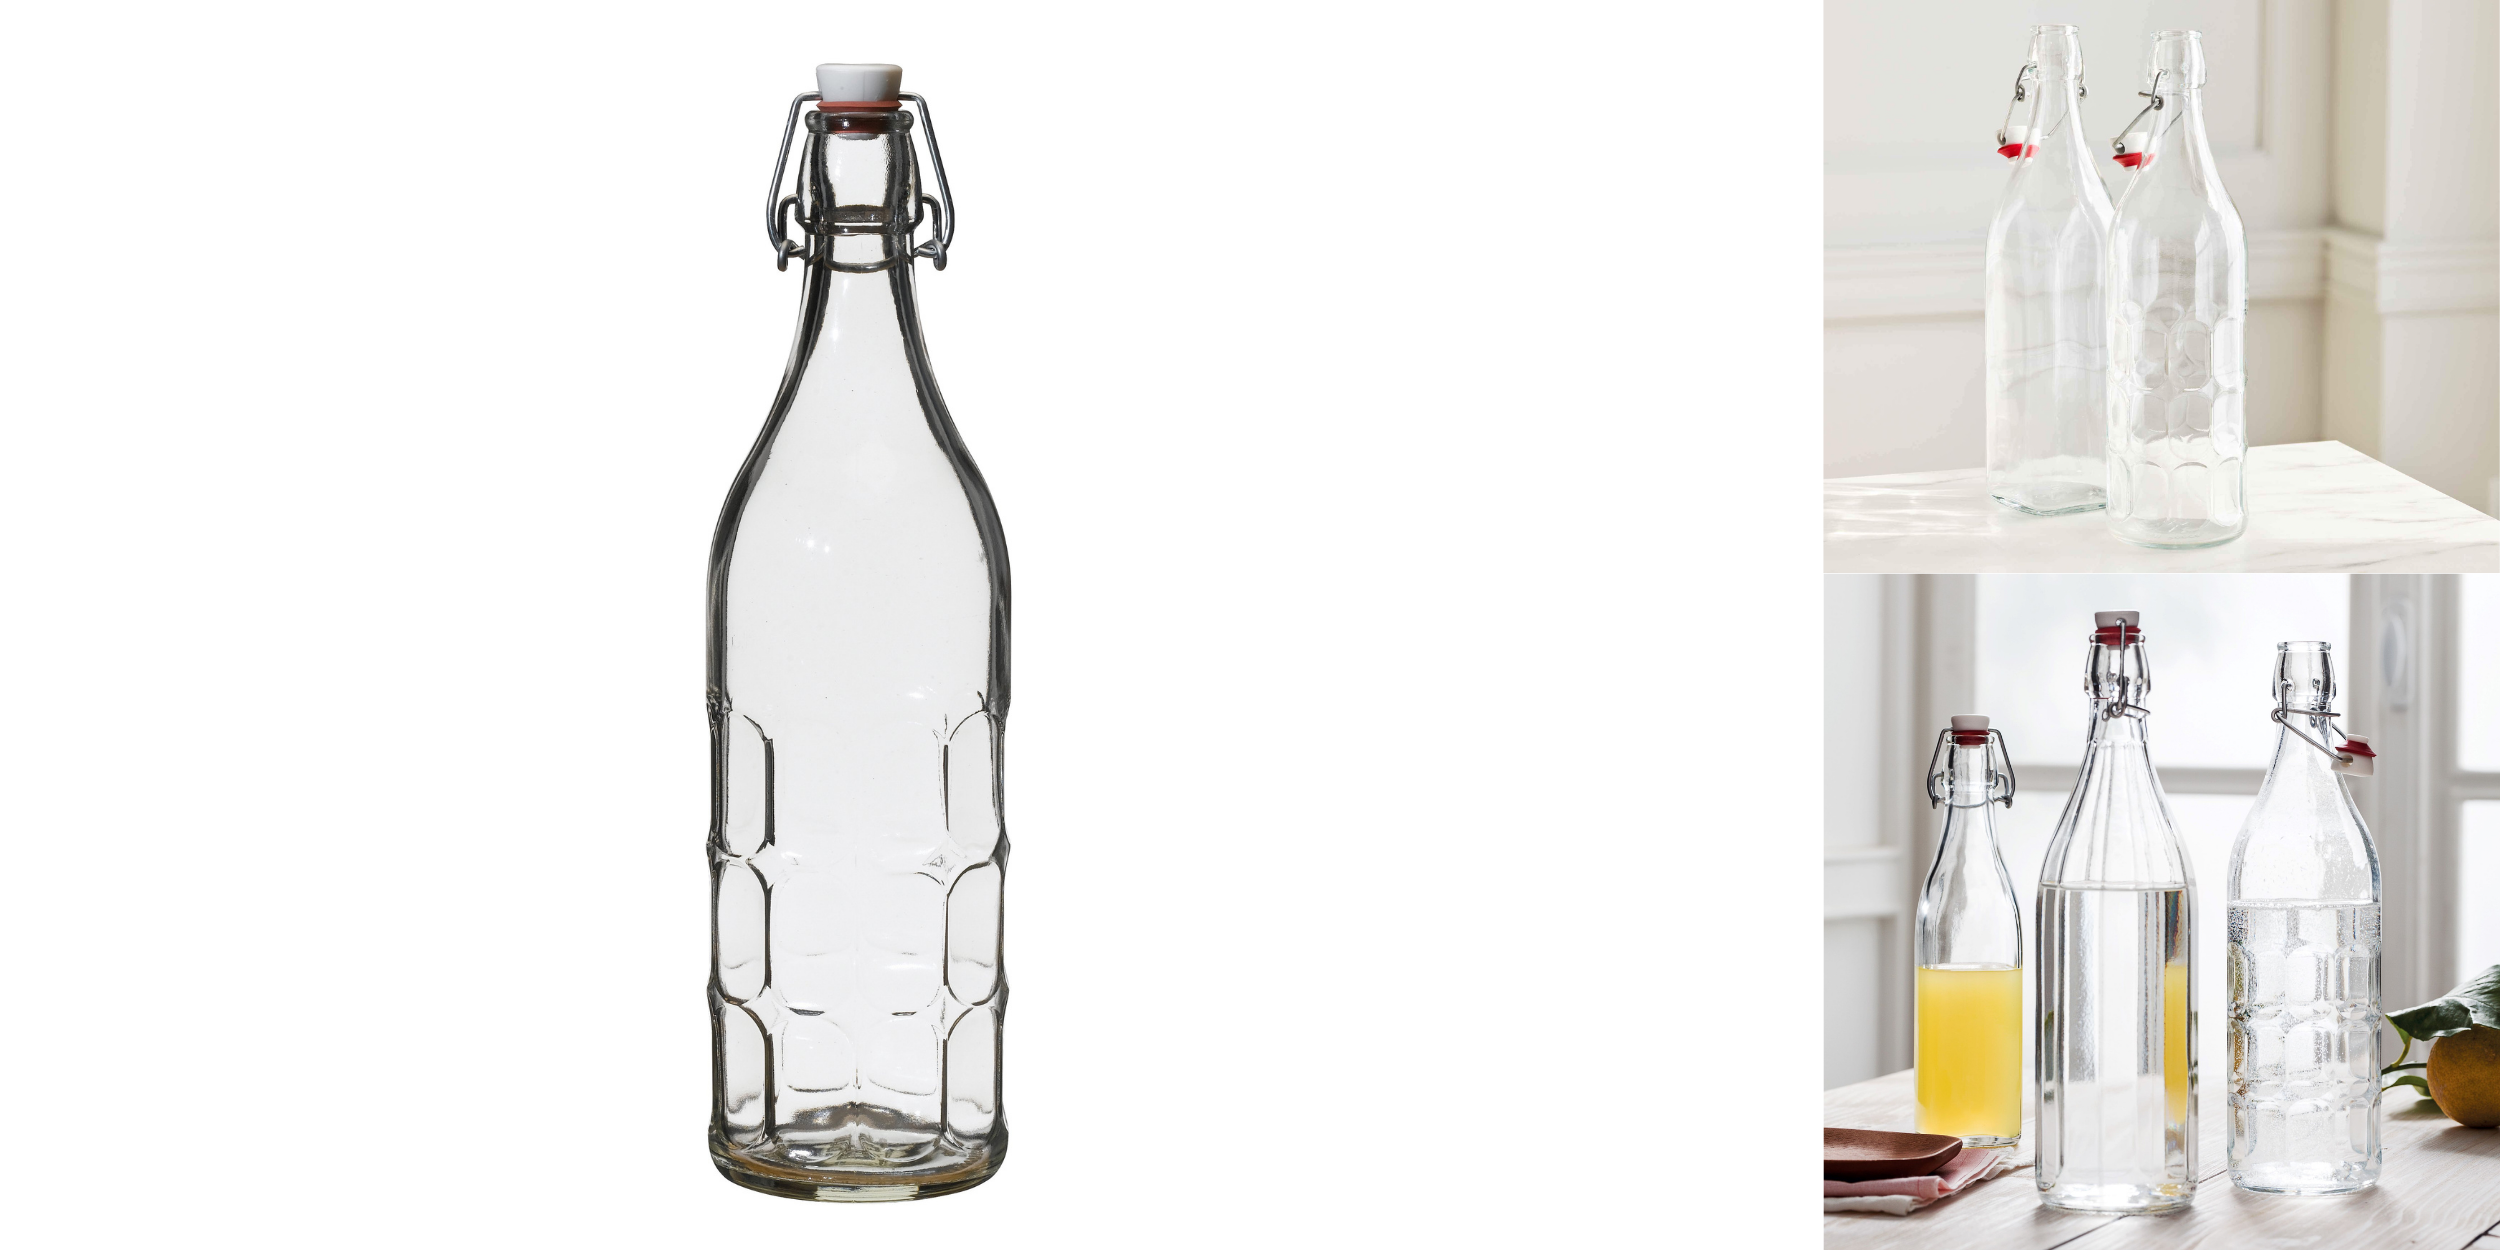 34 oz serving glass bottle. Displayed both empty and with drinks in them